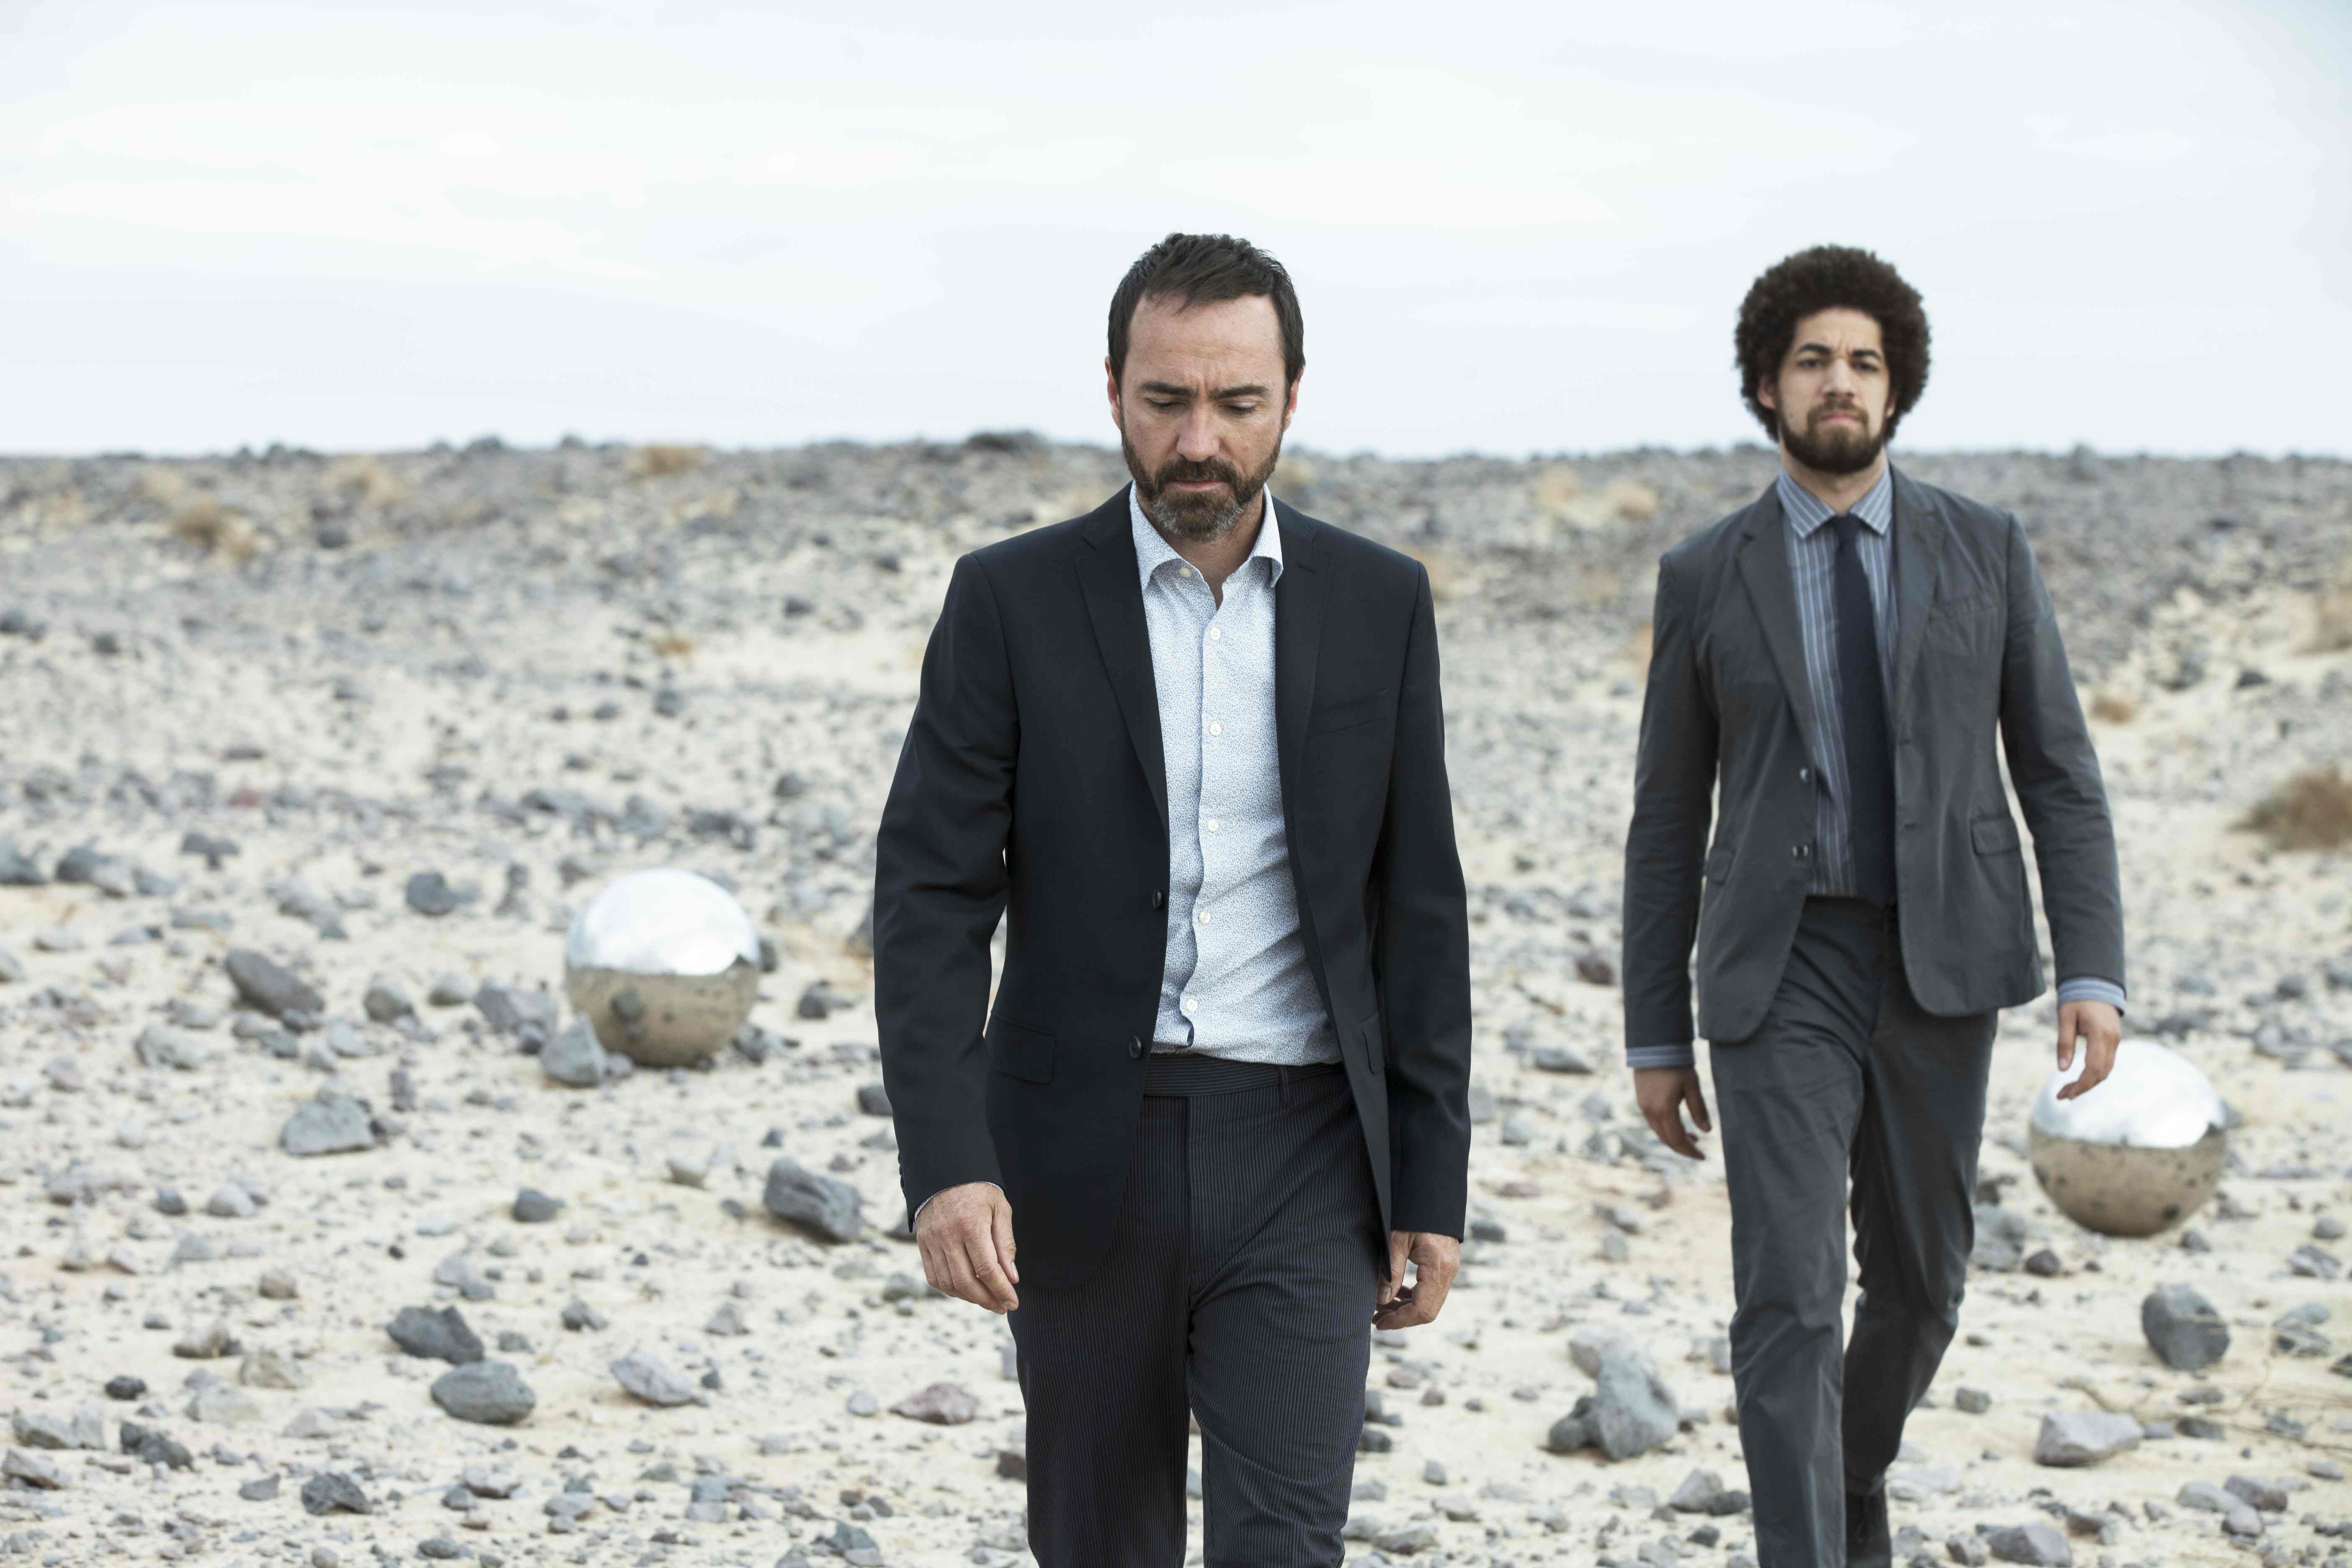 Broken Bells' album, After the Disco, is out now. (Courtesy of the artist)